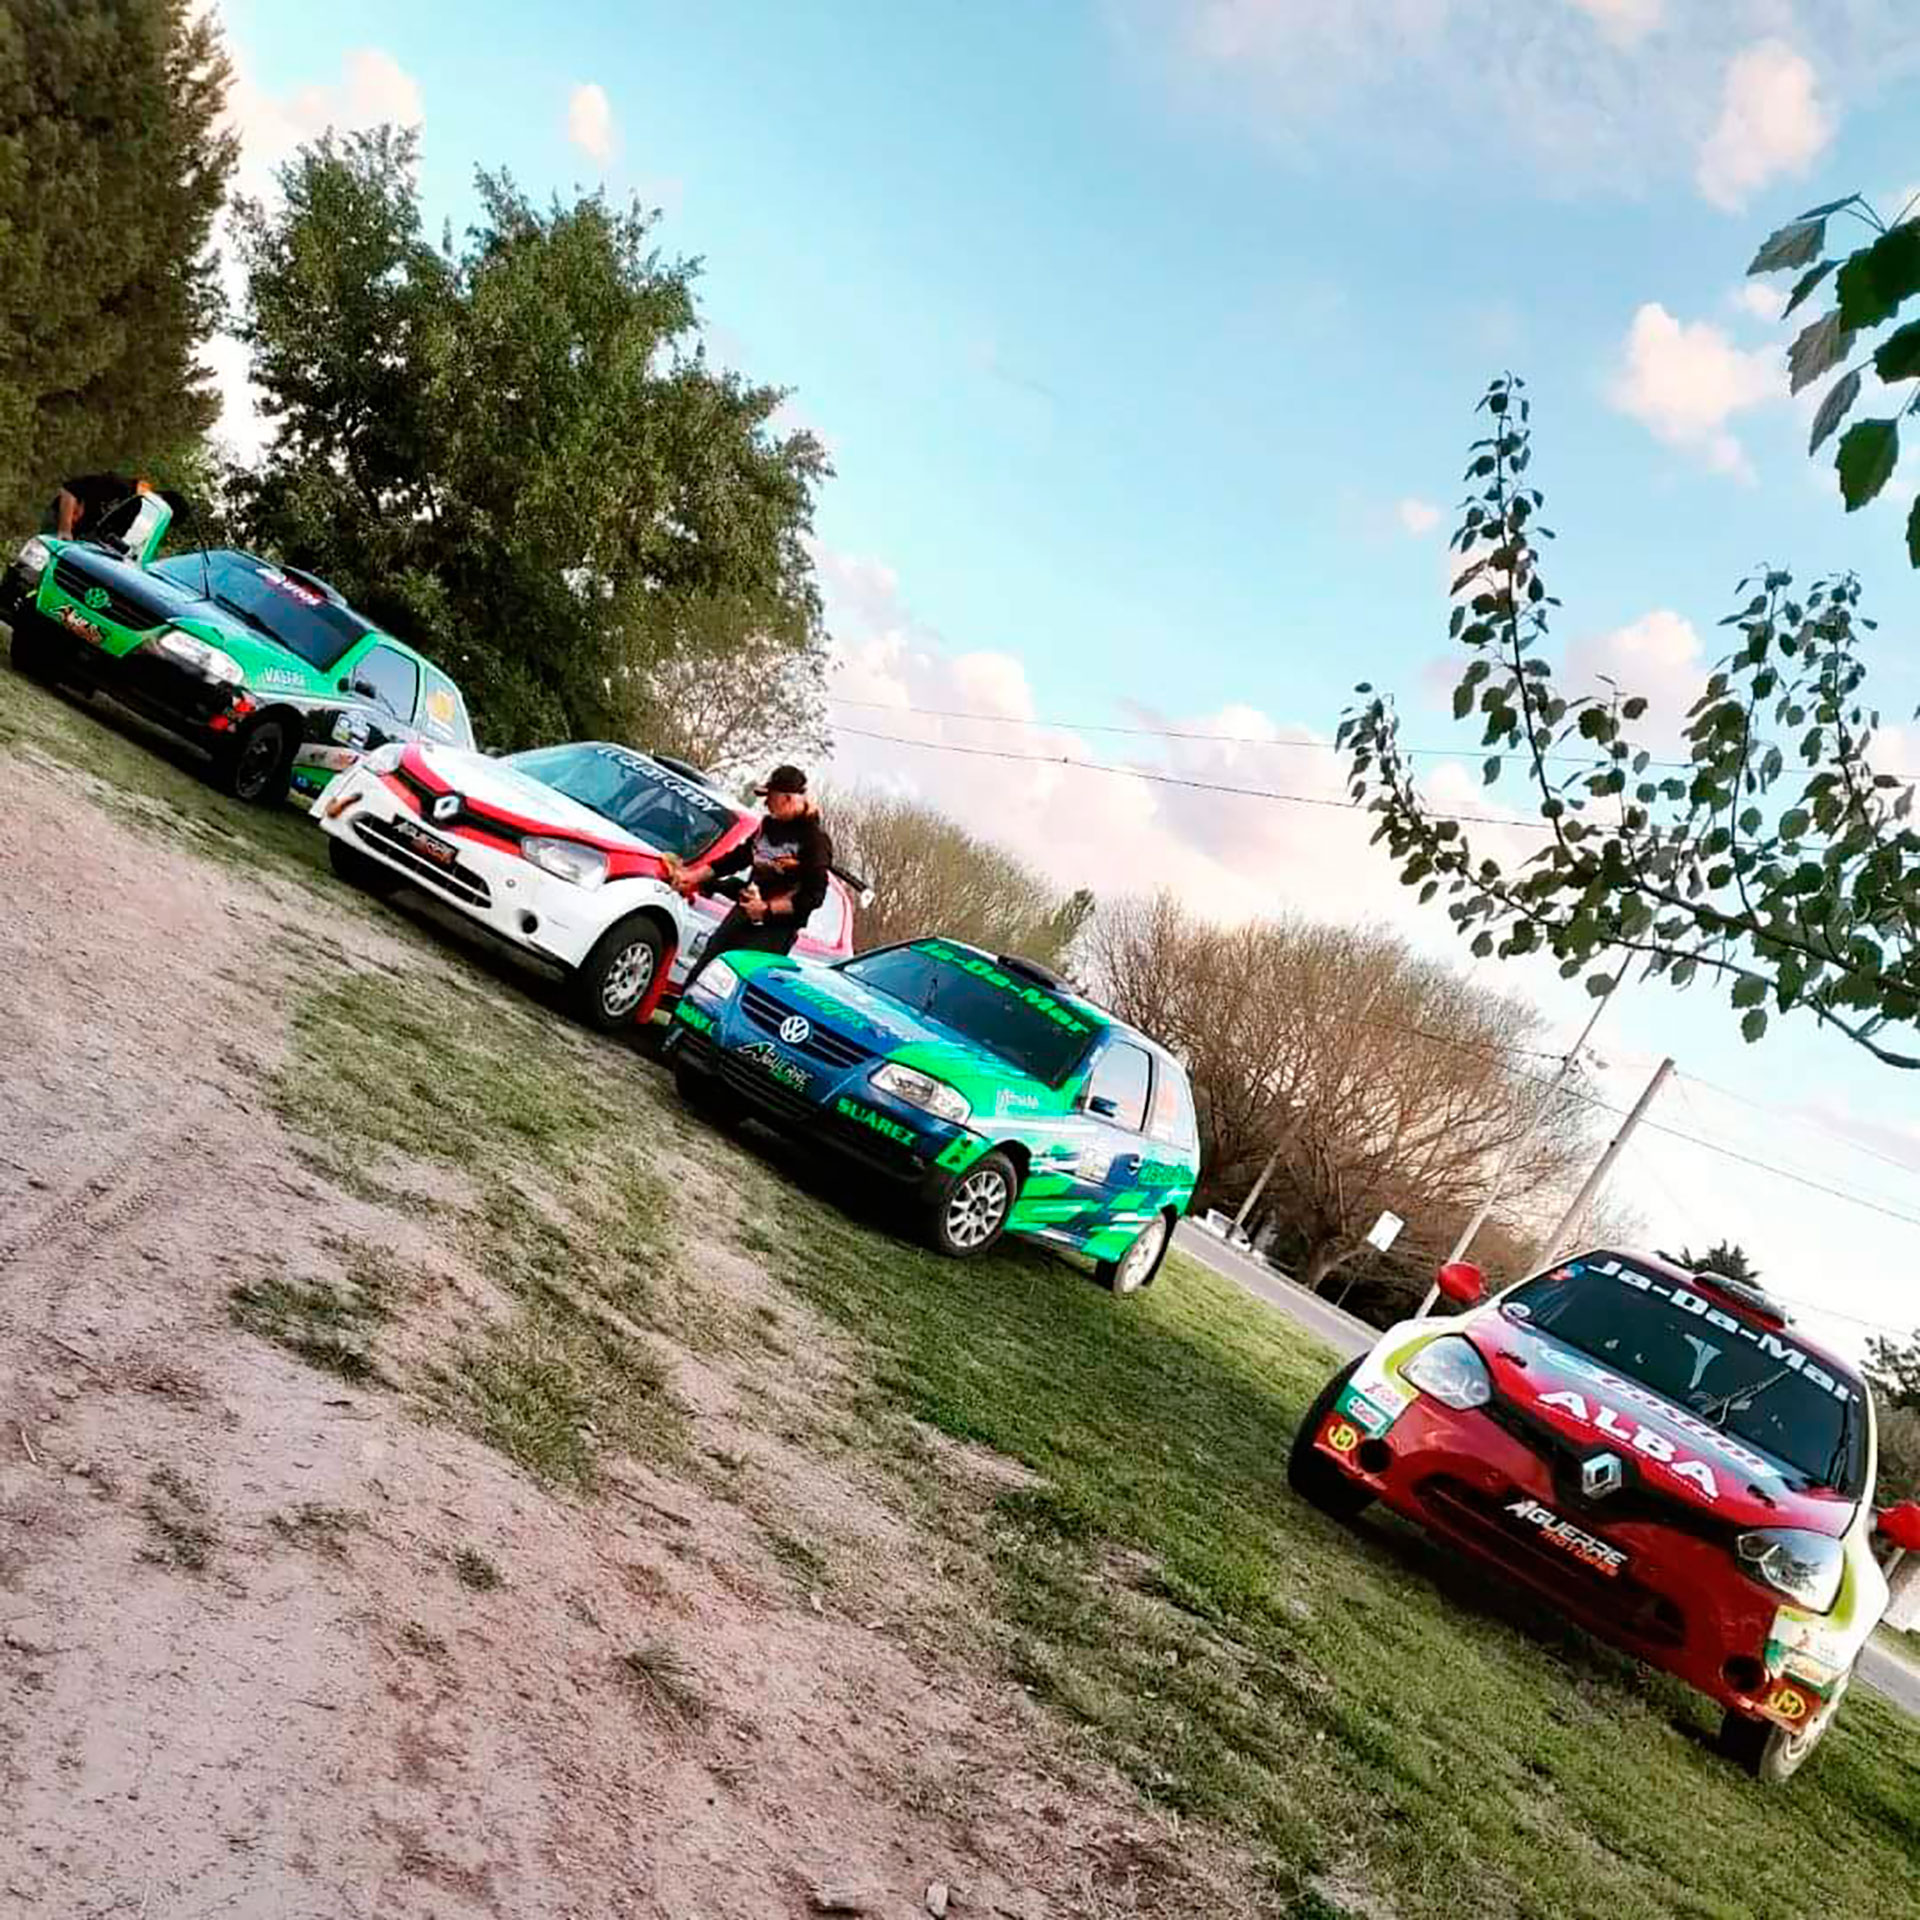 Pereira'S Car Before The Competition, Second From Right (Press: Rally Bonaires Del Sudoeste)